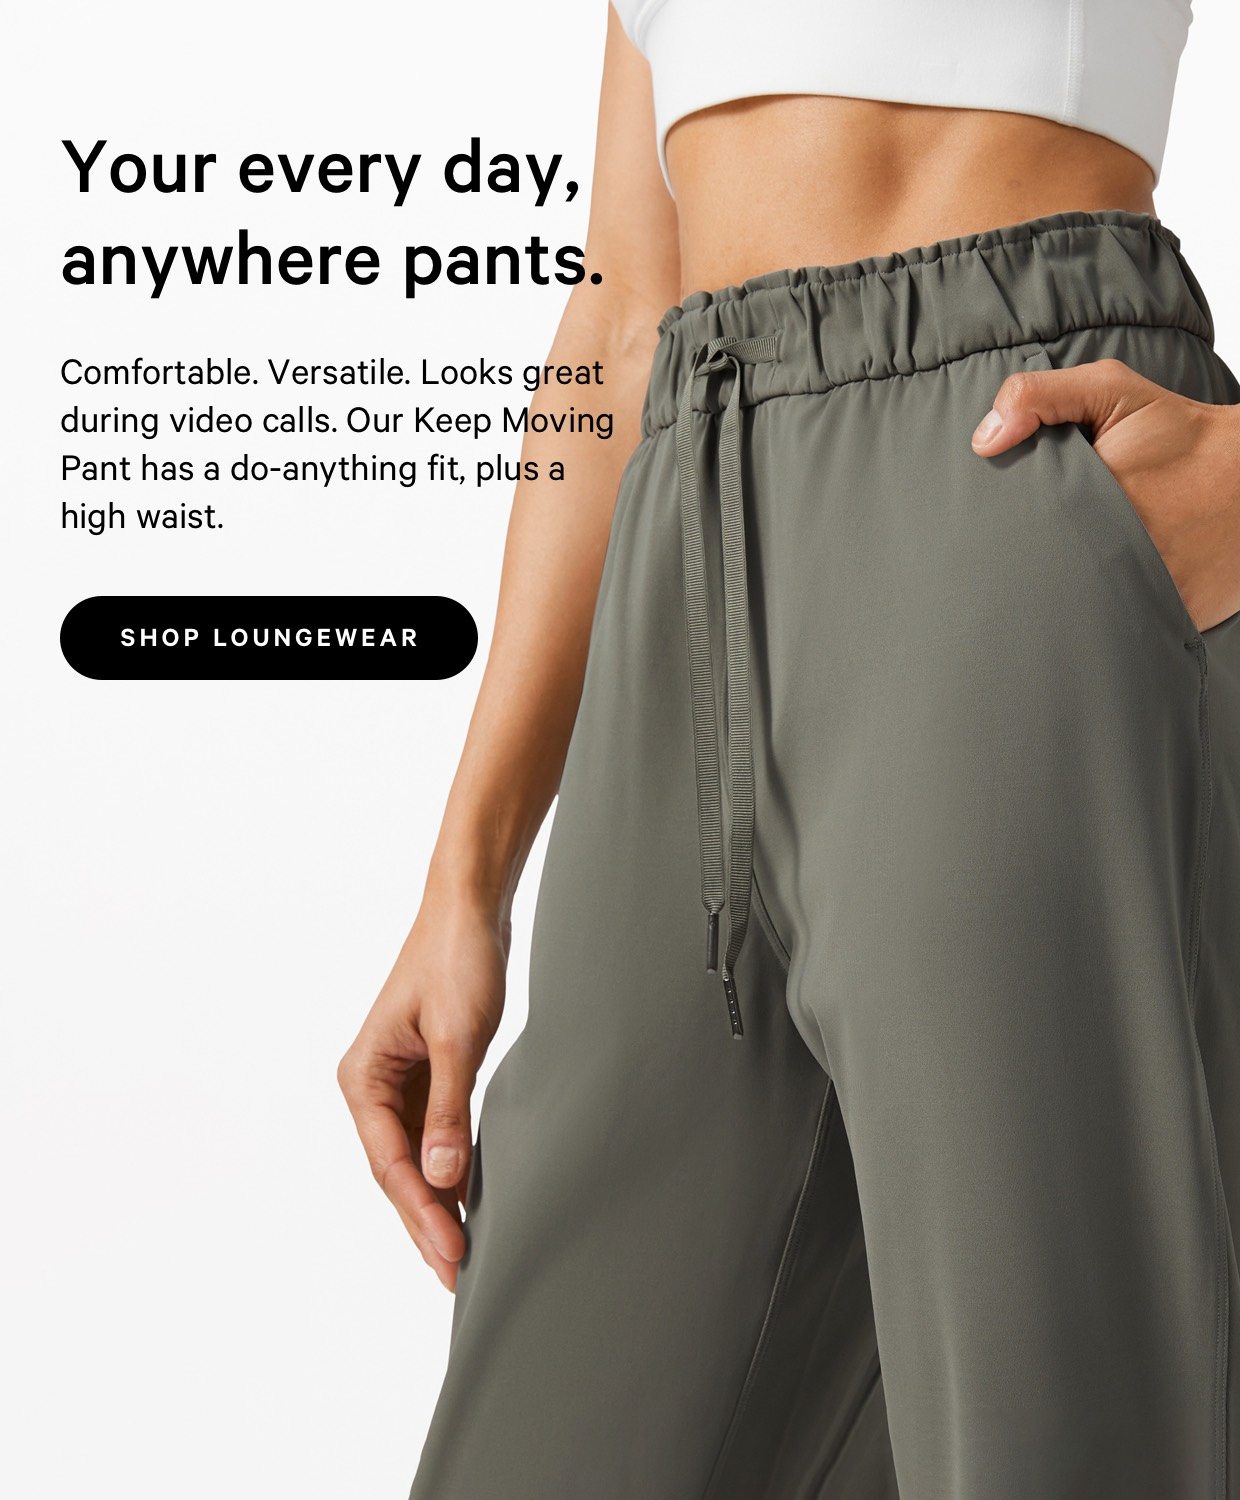 Really comfortable pants, ready to work from home - lululemon